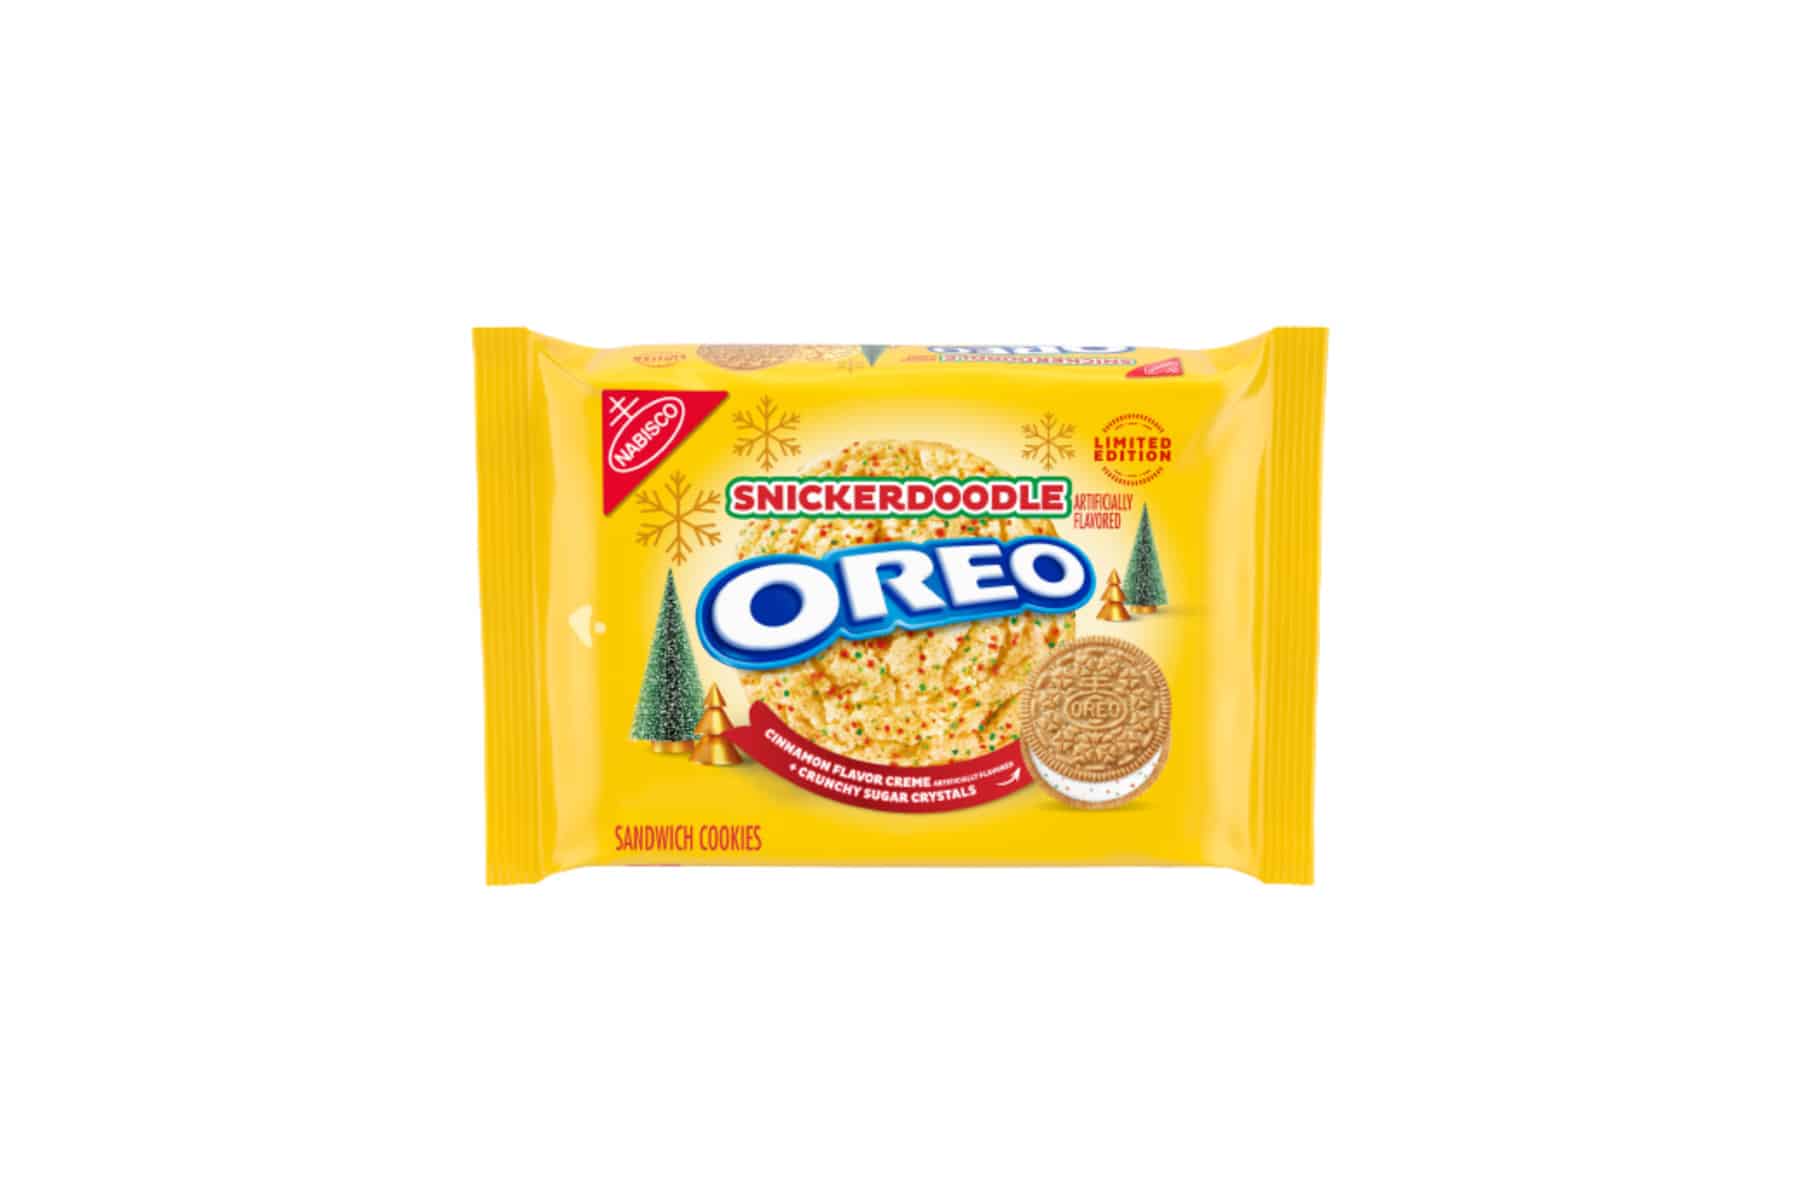 Yellow package of golden snickerdoodle Oreos.